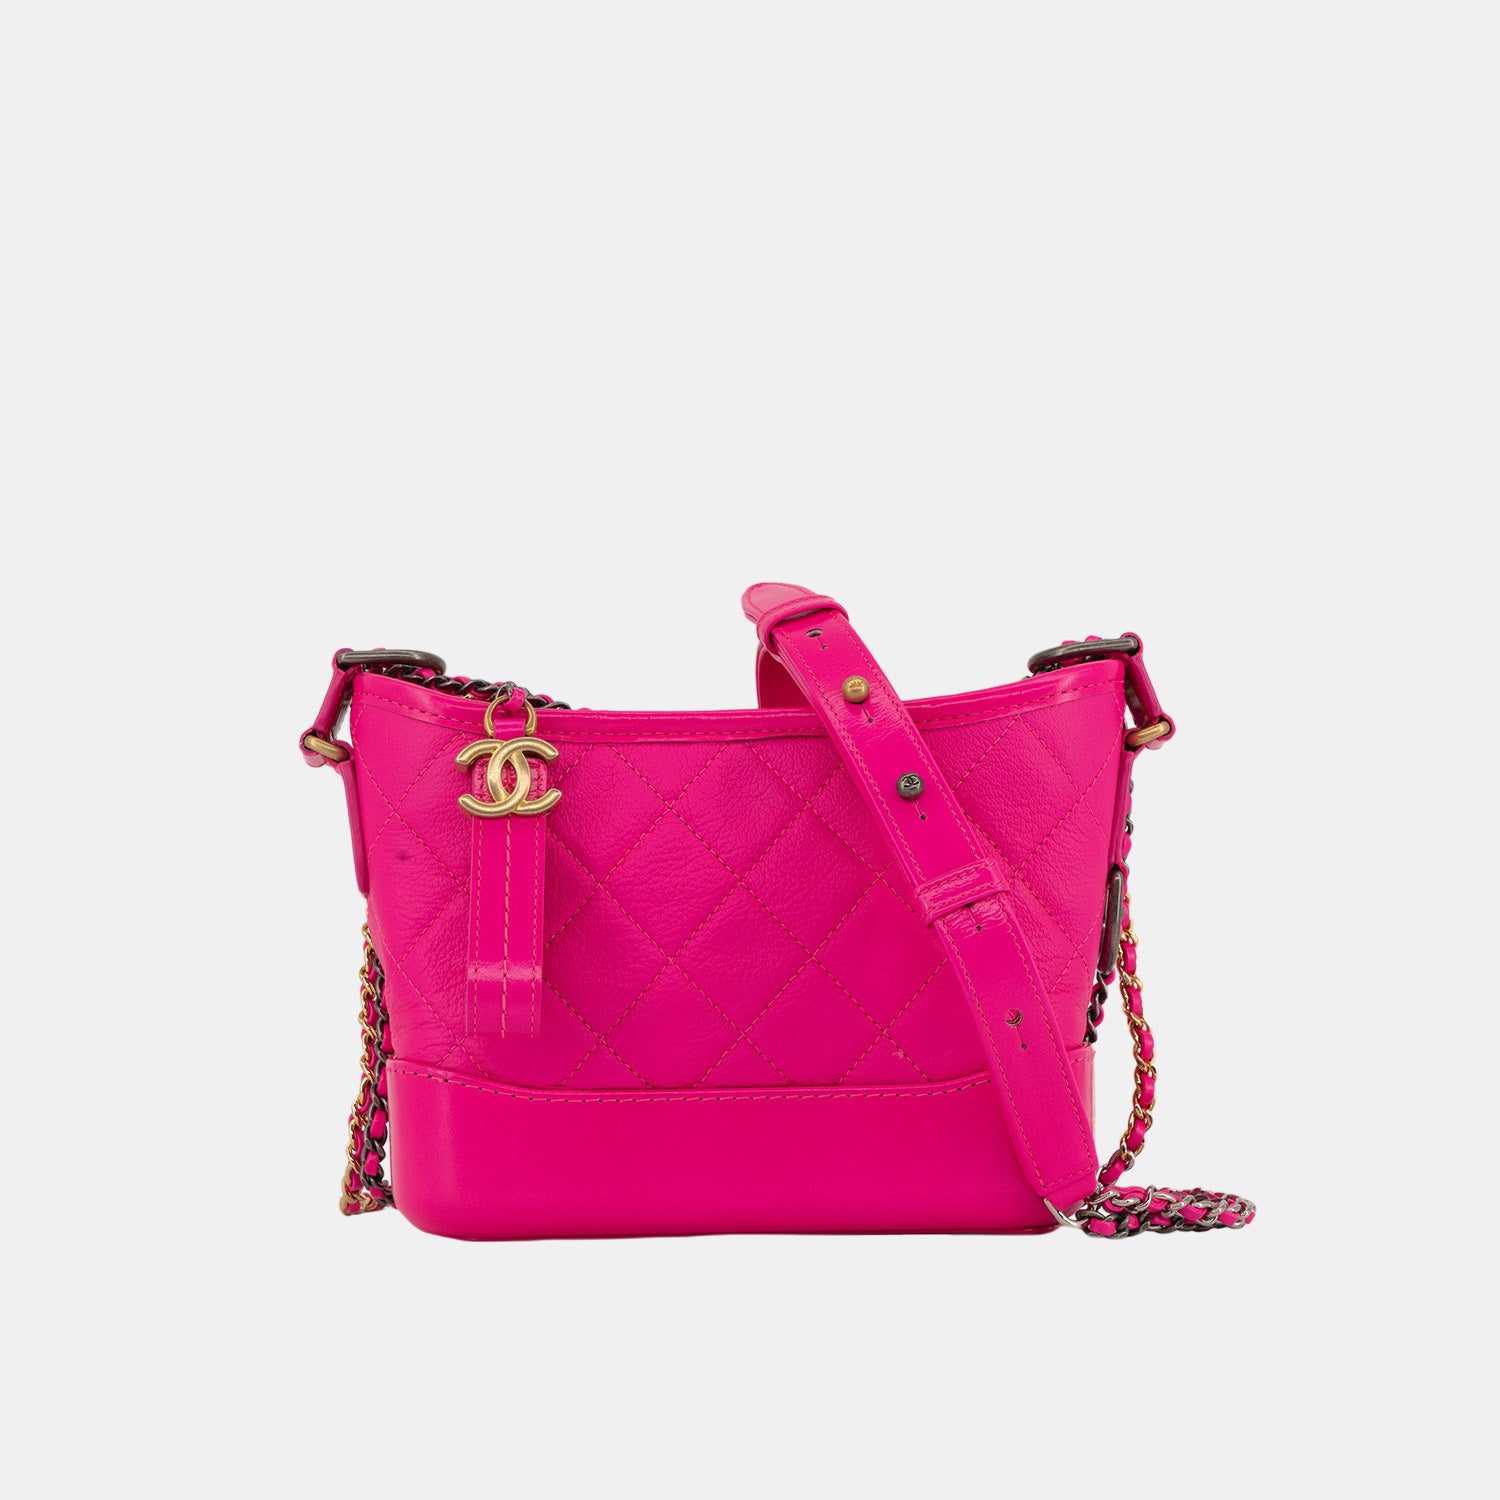 CHANEL BAG BORSA Small bag GABRIELLE by CHANEL SMALL Pink Multiple